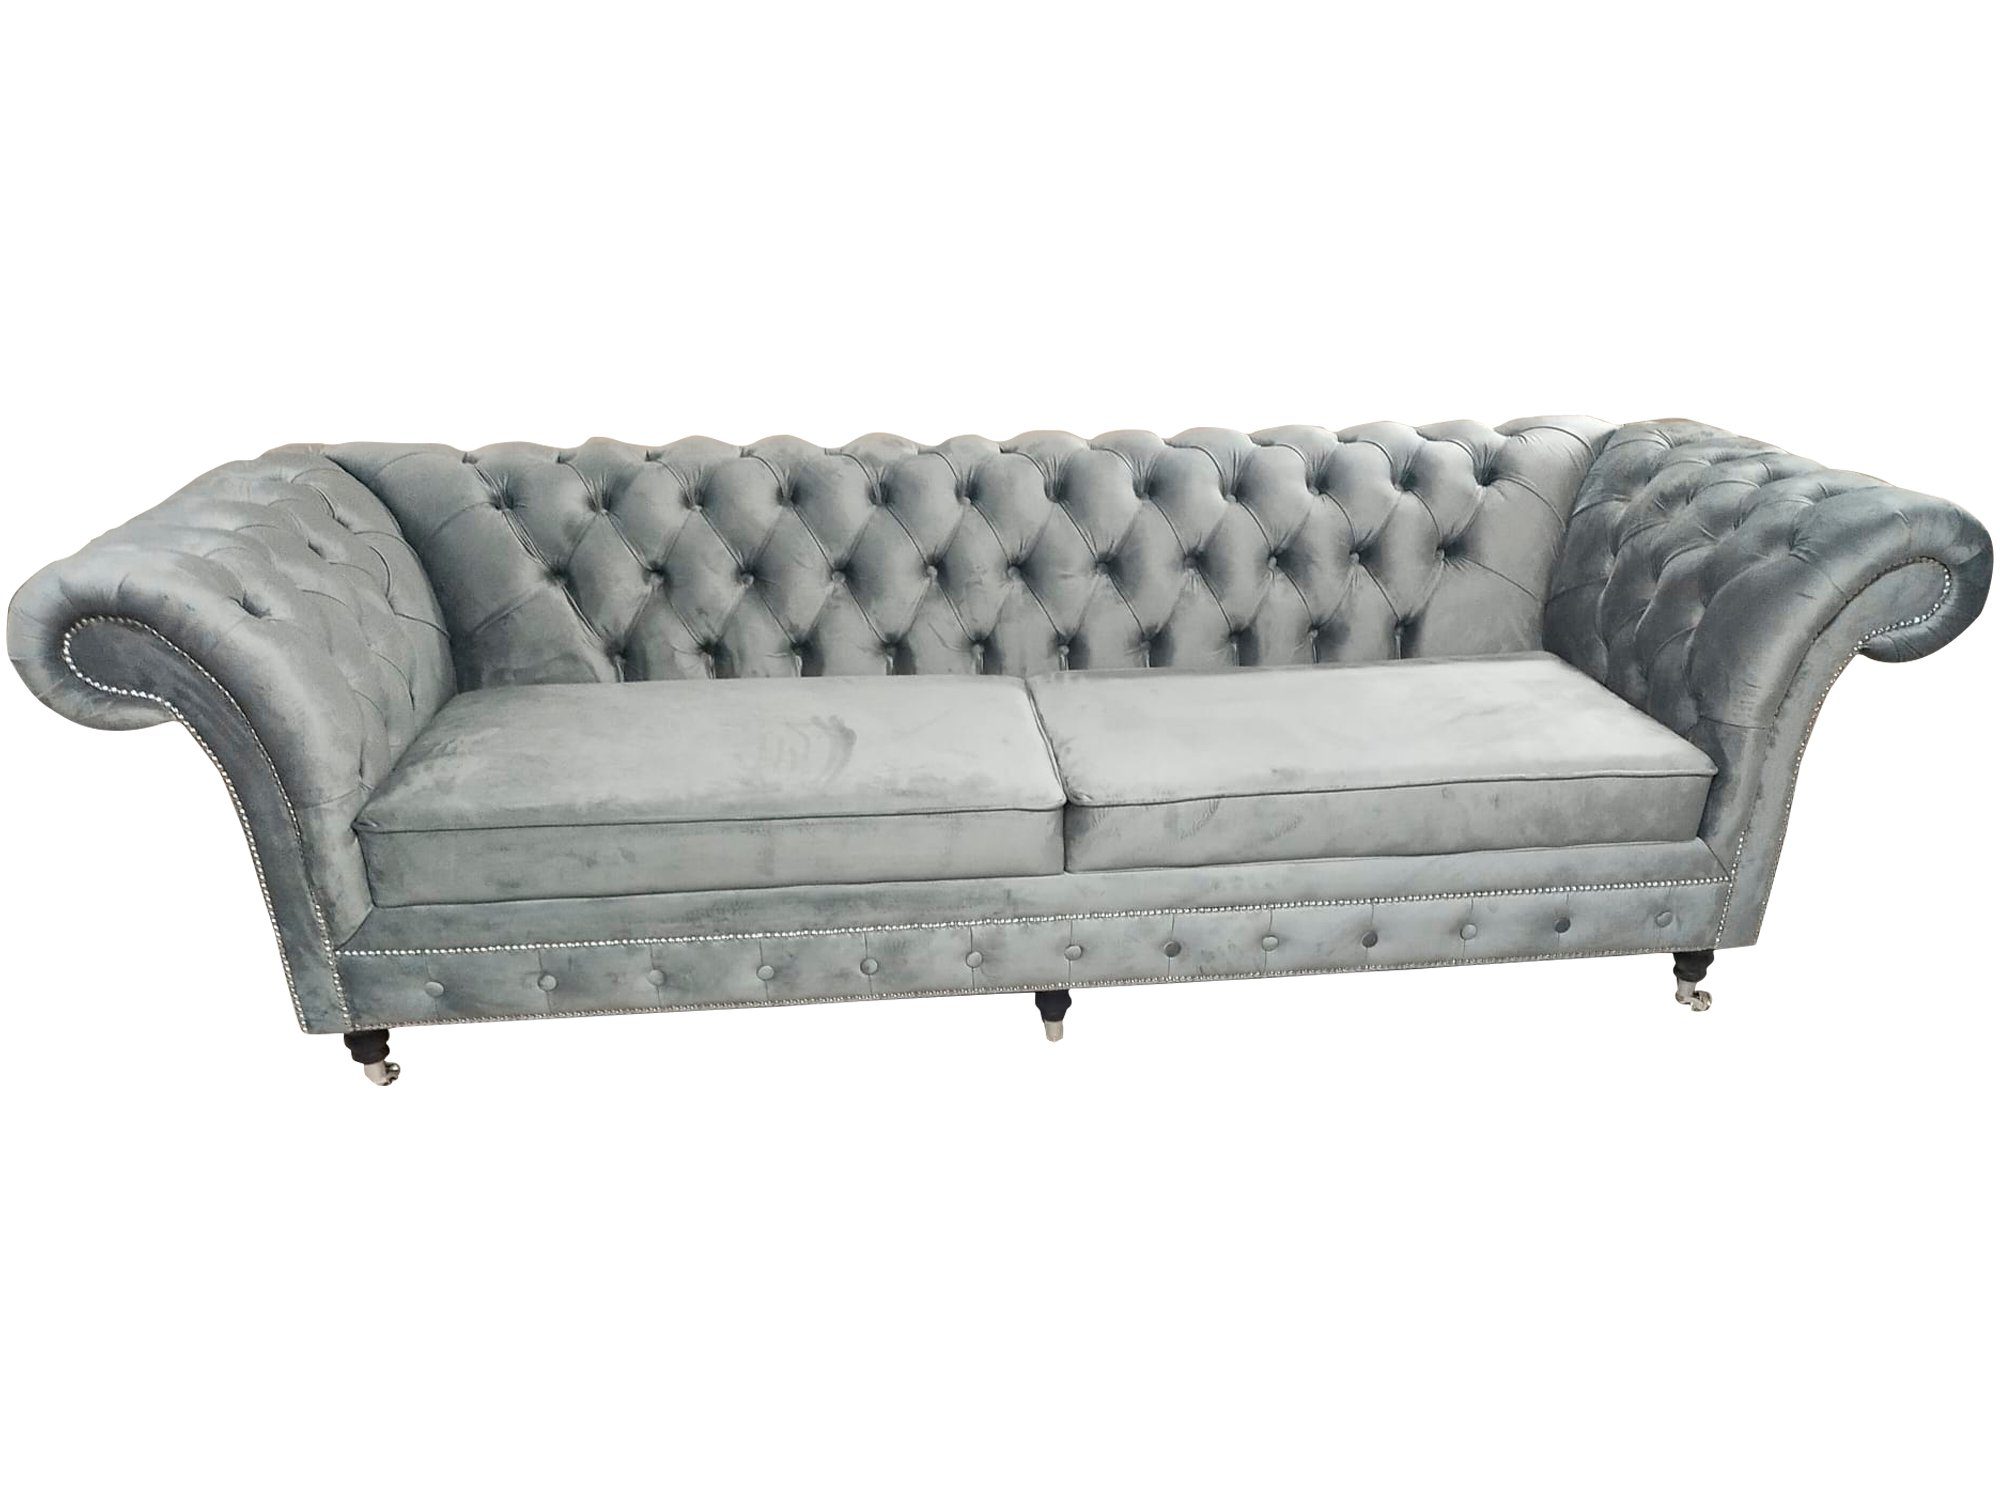 Textil Sofas Stoff Sitzer Polster JVmoebel Sofa, 3 Couch Chesterfield Couchen Sofa